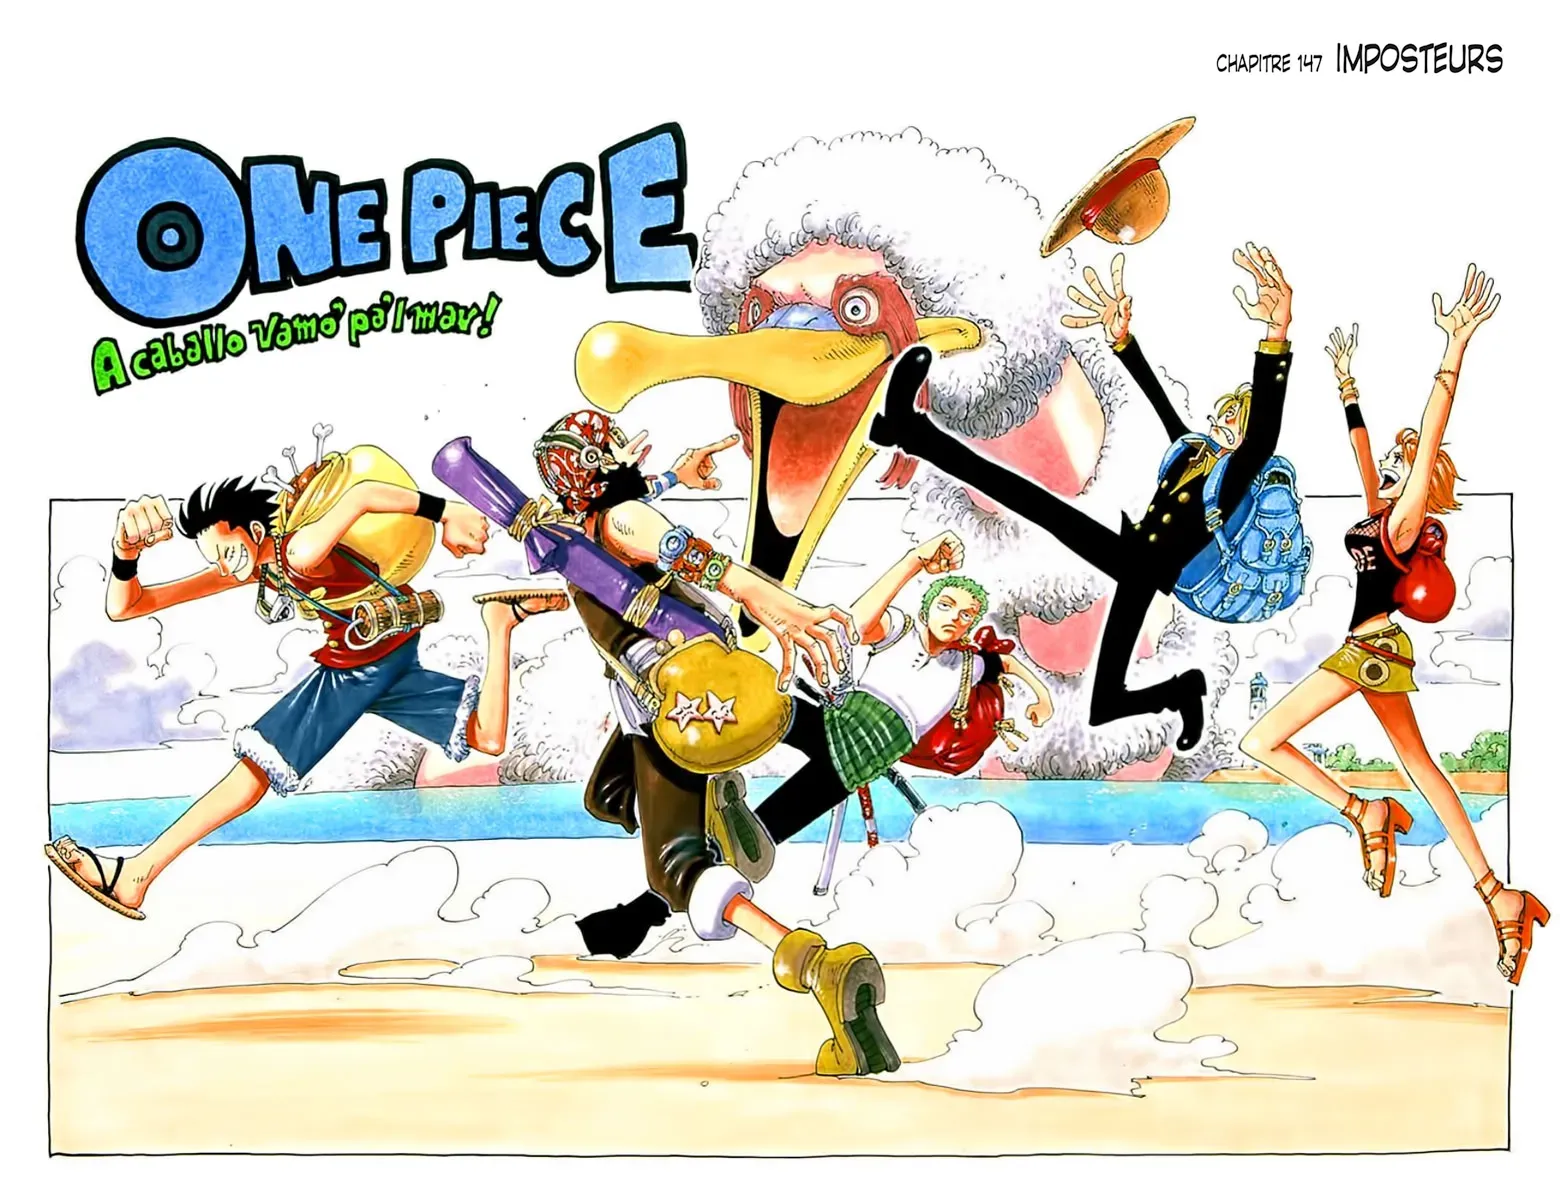 One Piece: Chapter chapitre-147 - Page 1